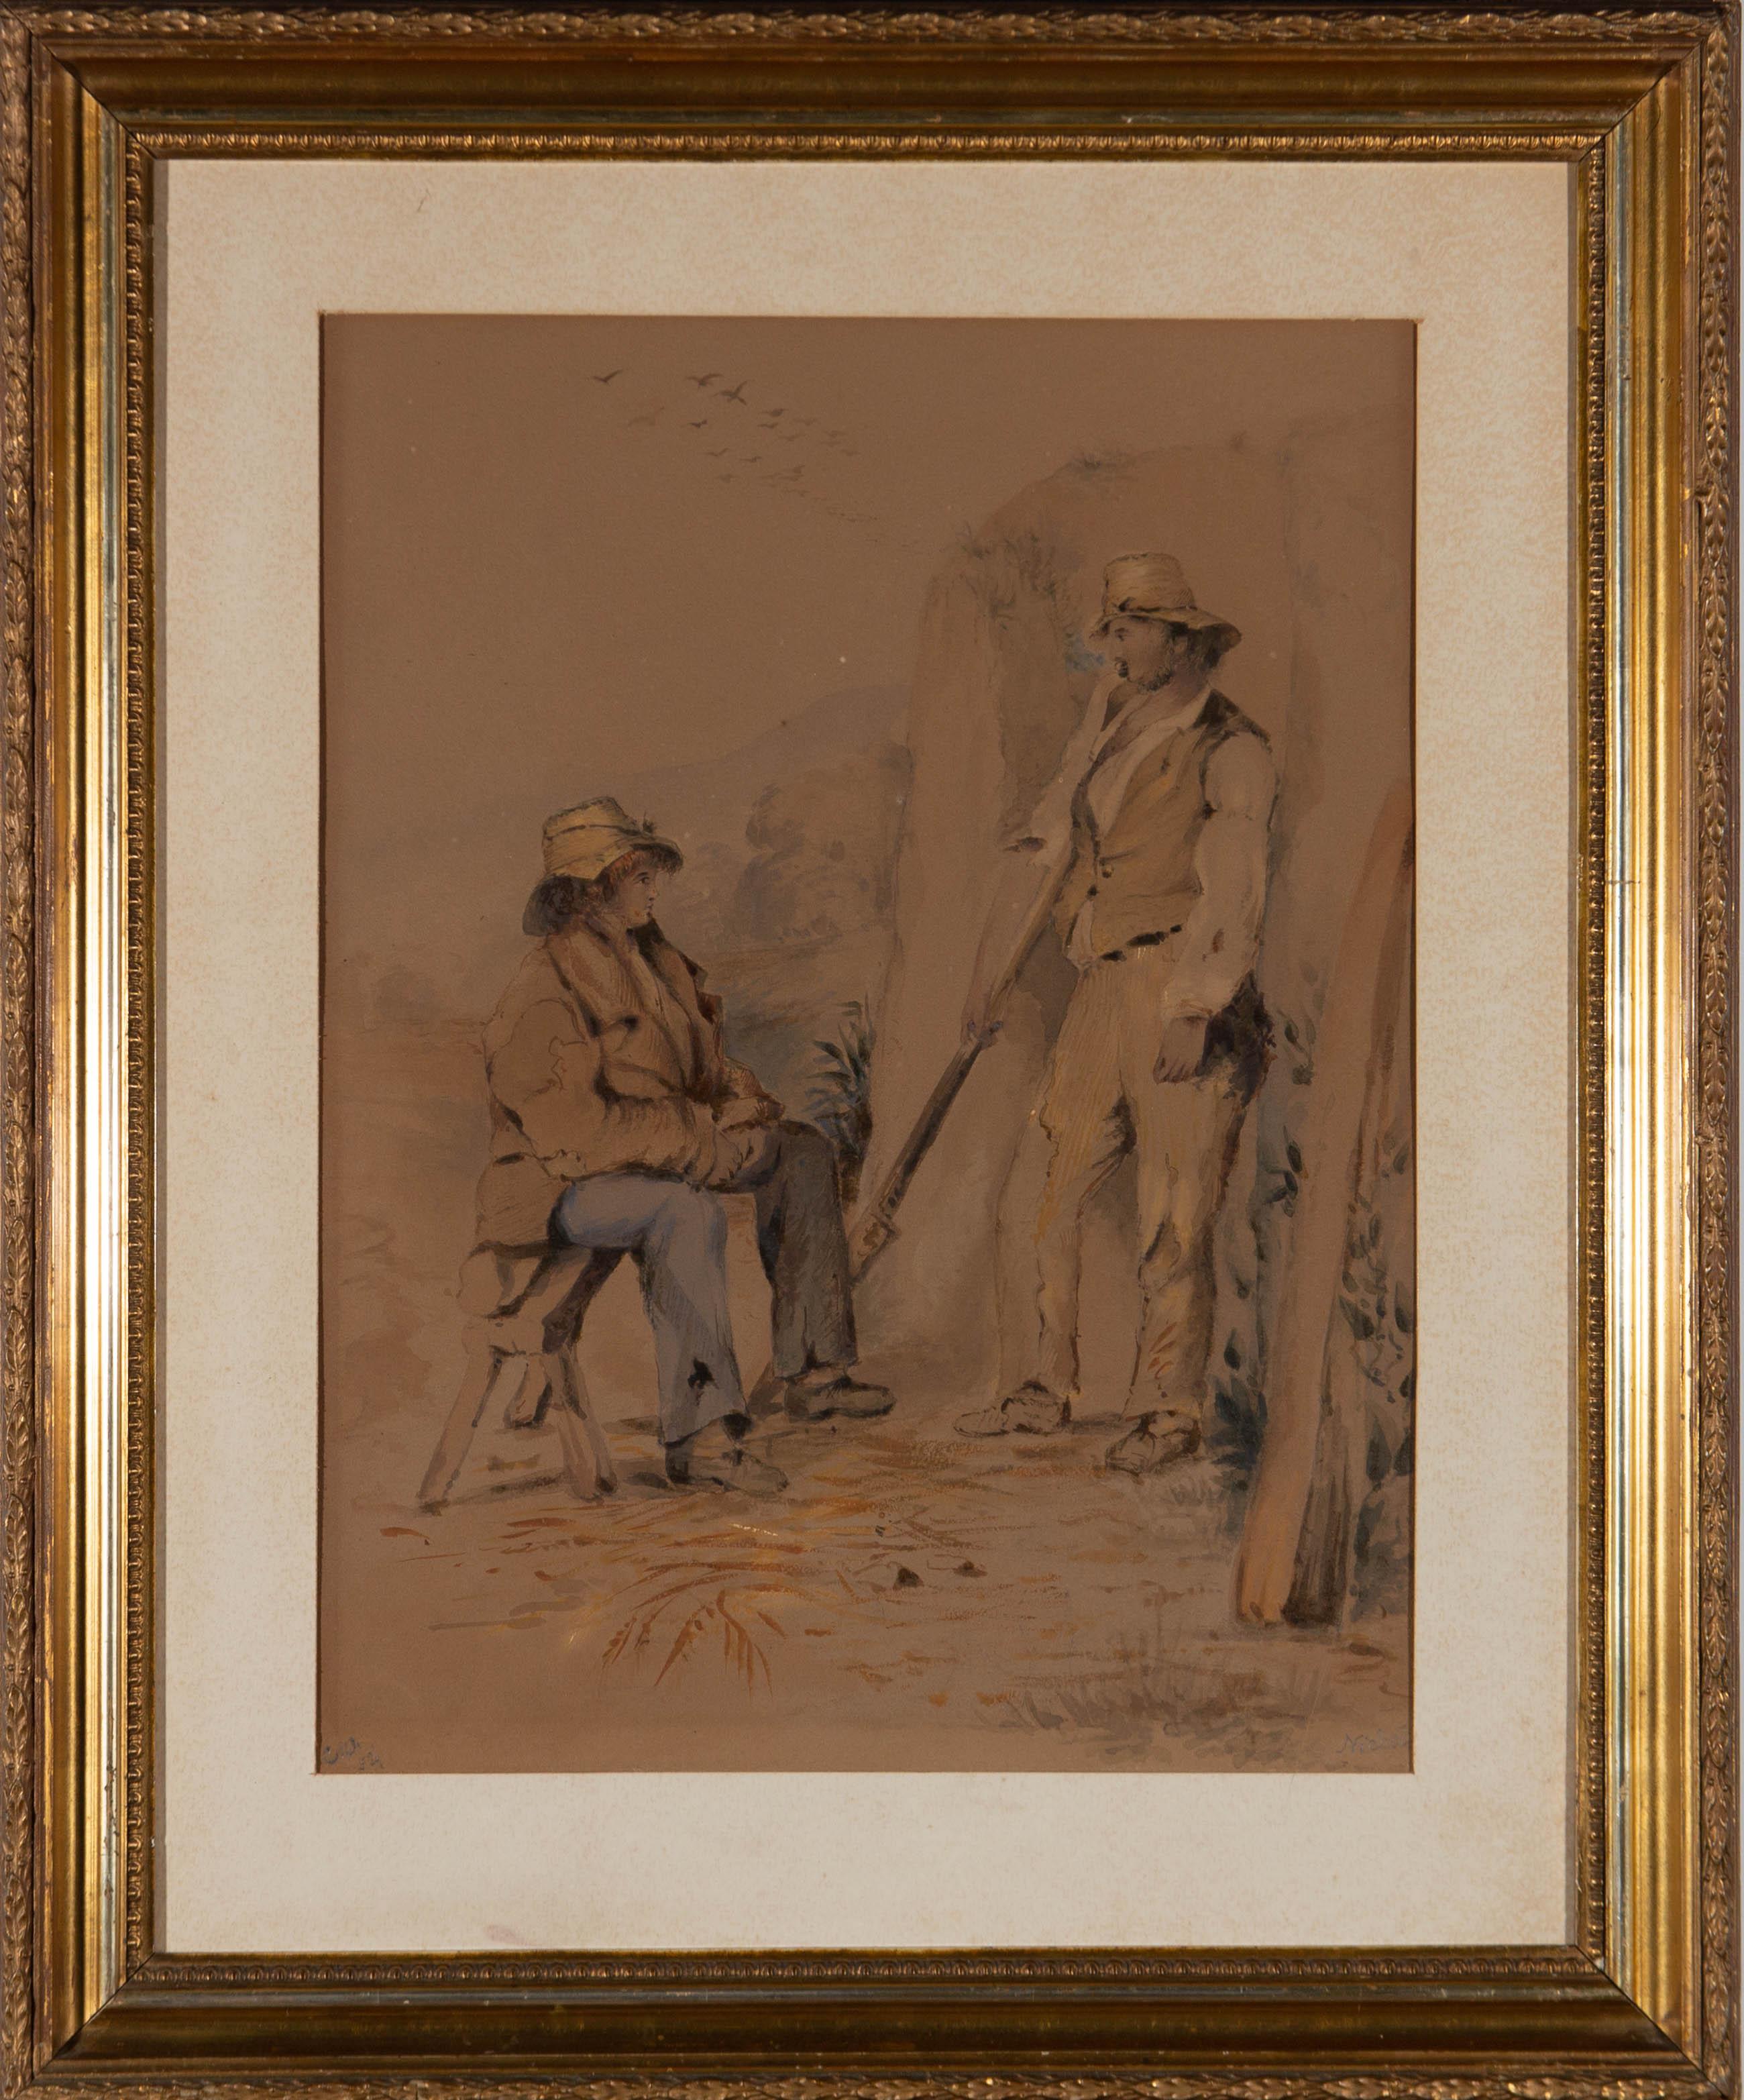 A charmingly rustic watercolour showing two men resting from their work, having a conversation. This watercolour is in the manner of the Scottish genre scene painter, Erskine Nicol. The scene captures much of realism and honesty of daily life for